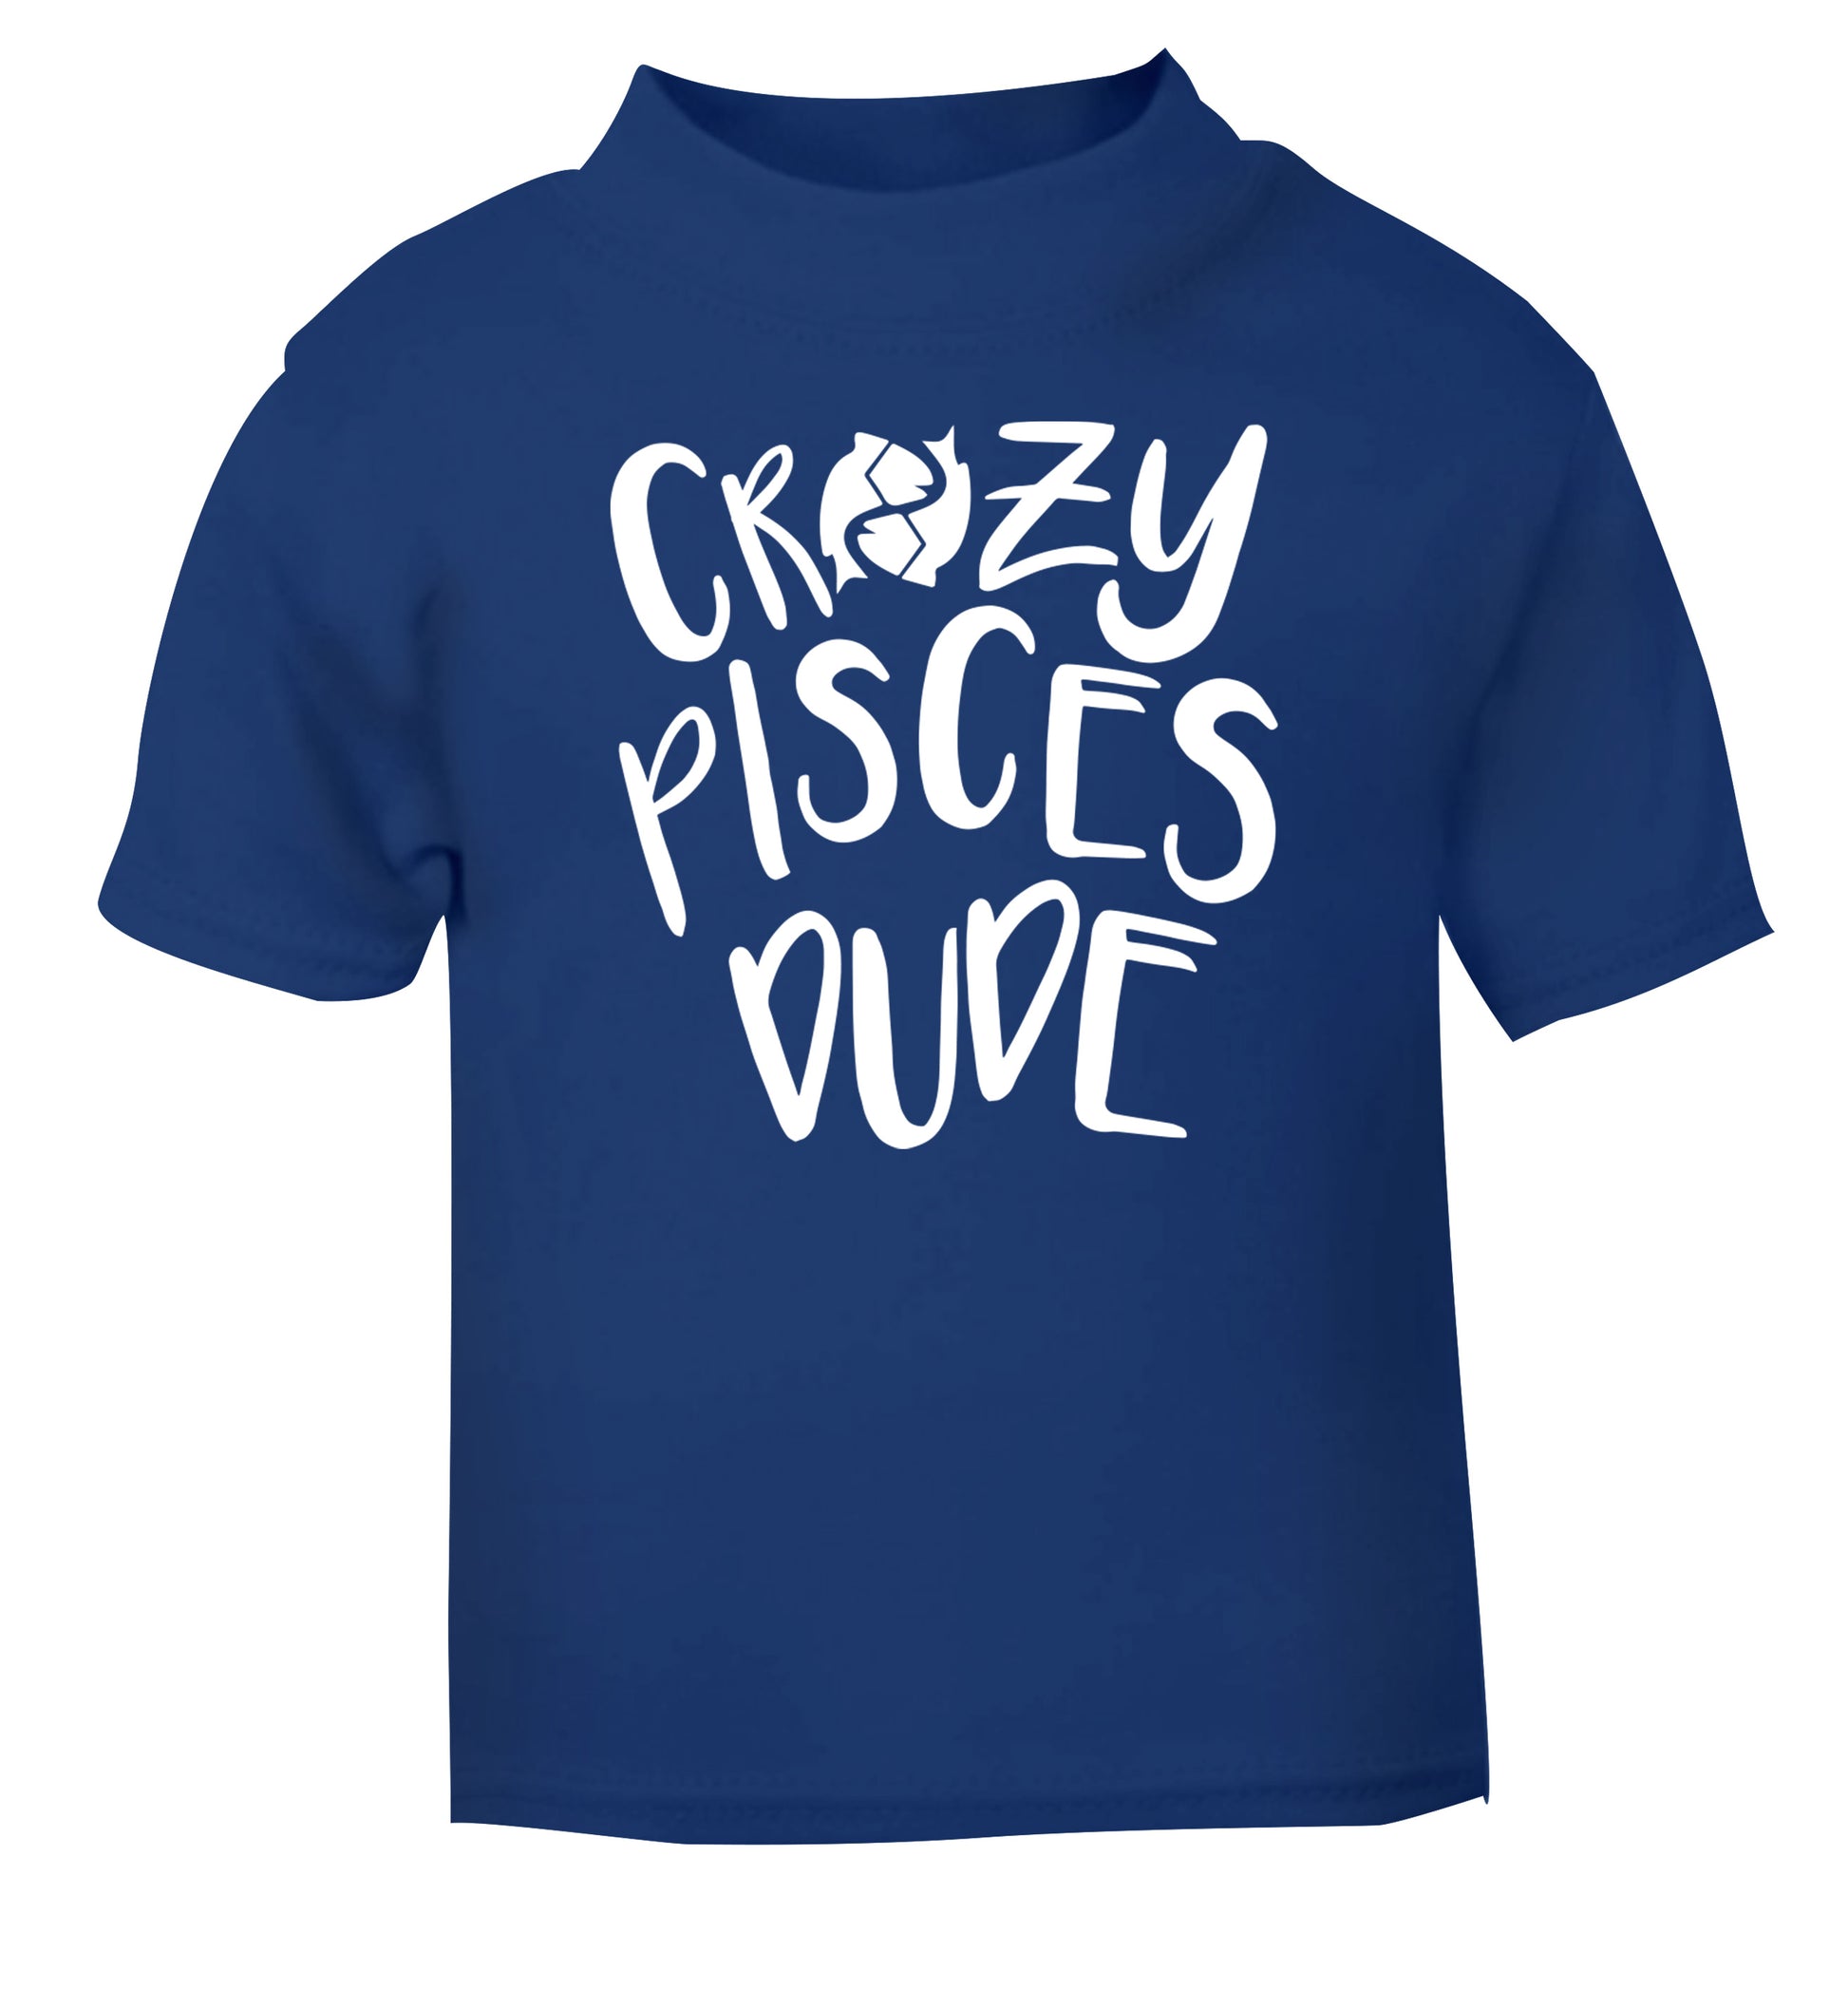 Crazy pisces dude blue Baby Toddler Tshirt 2 Years